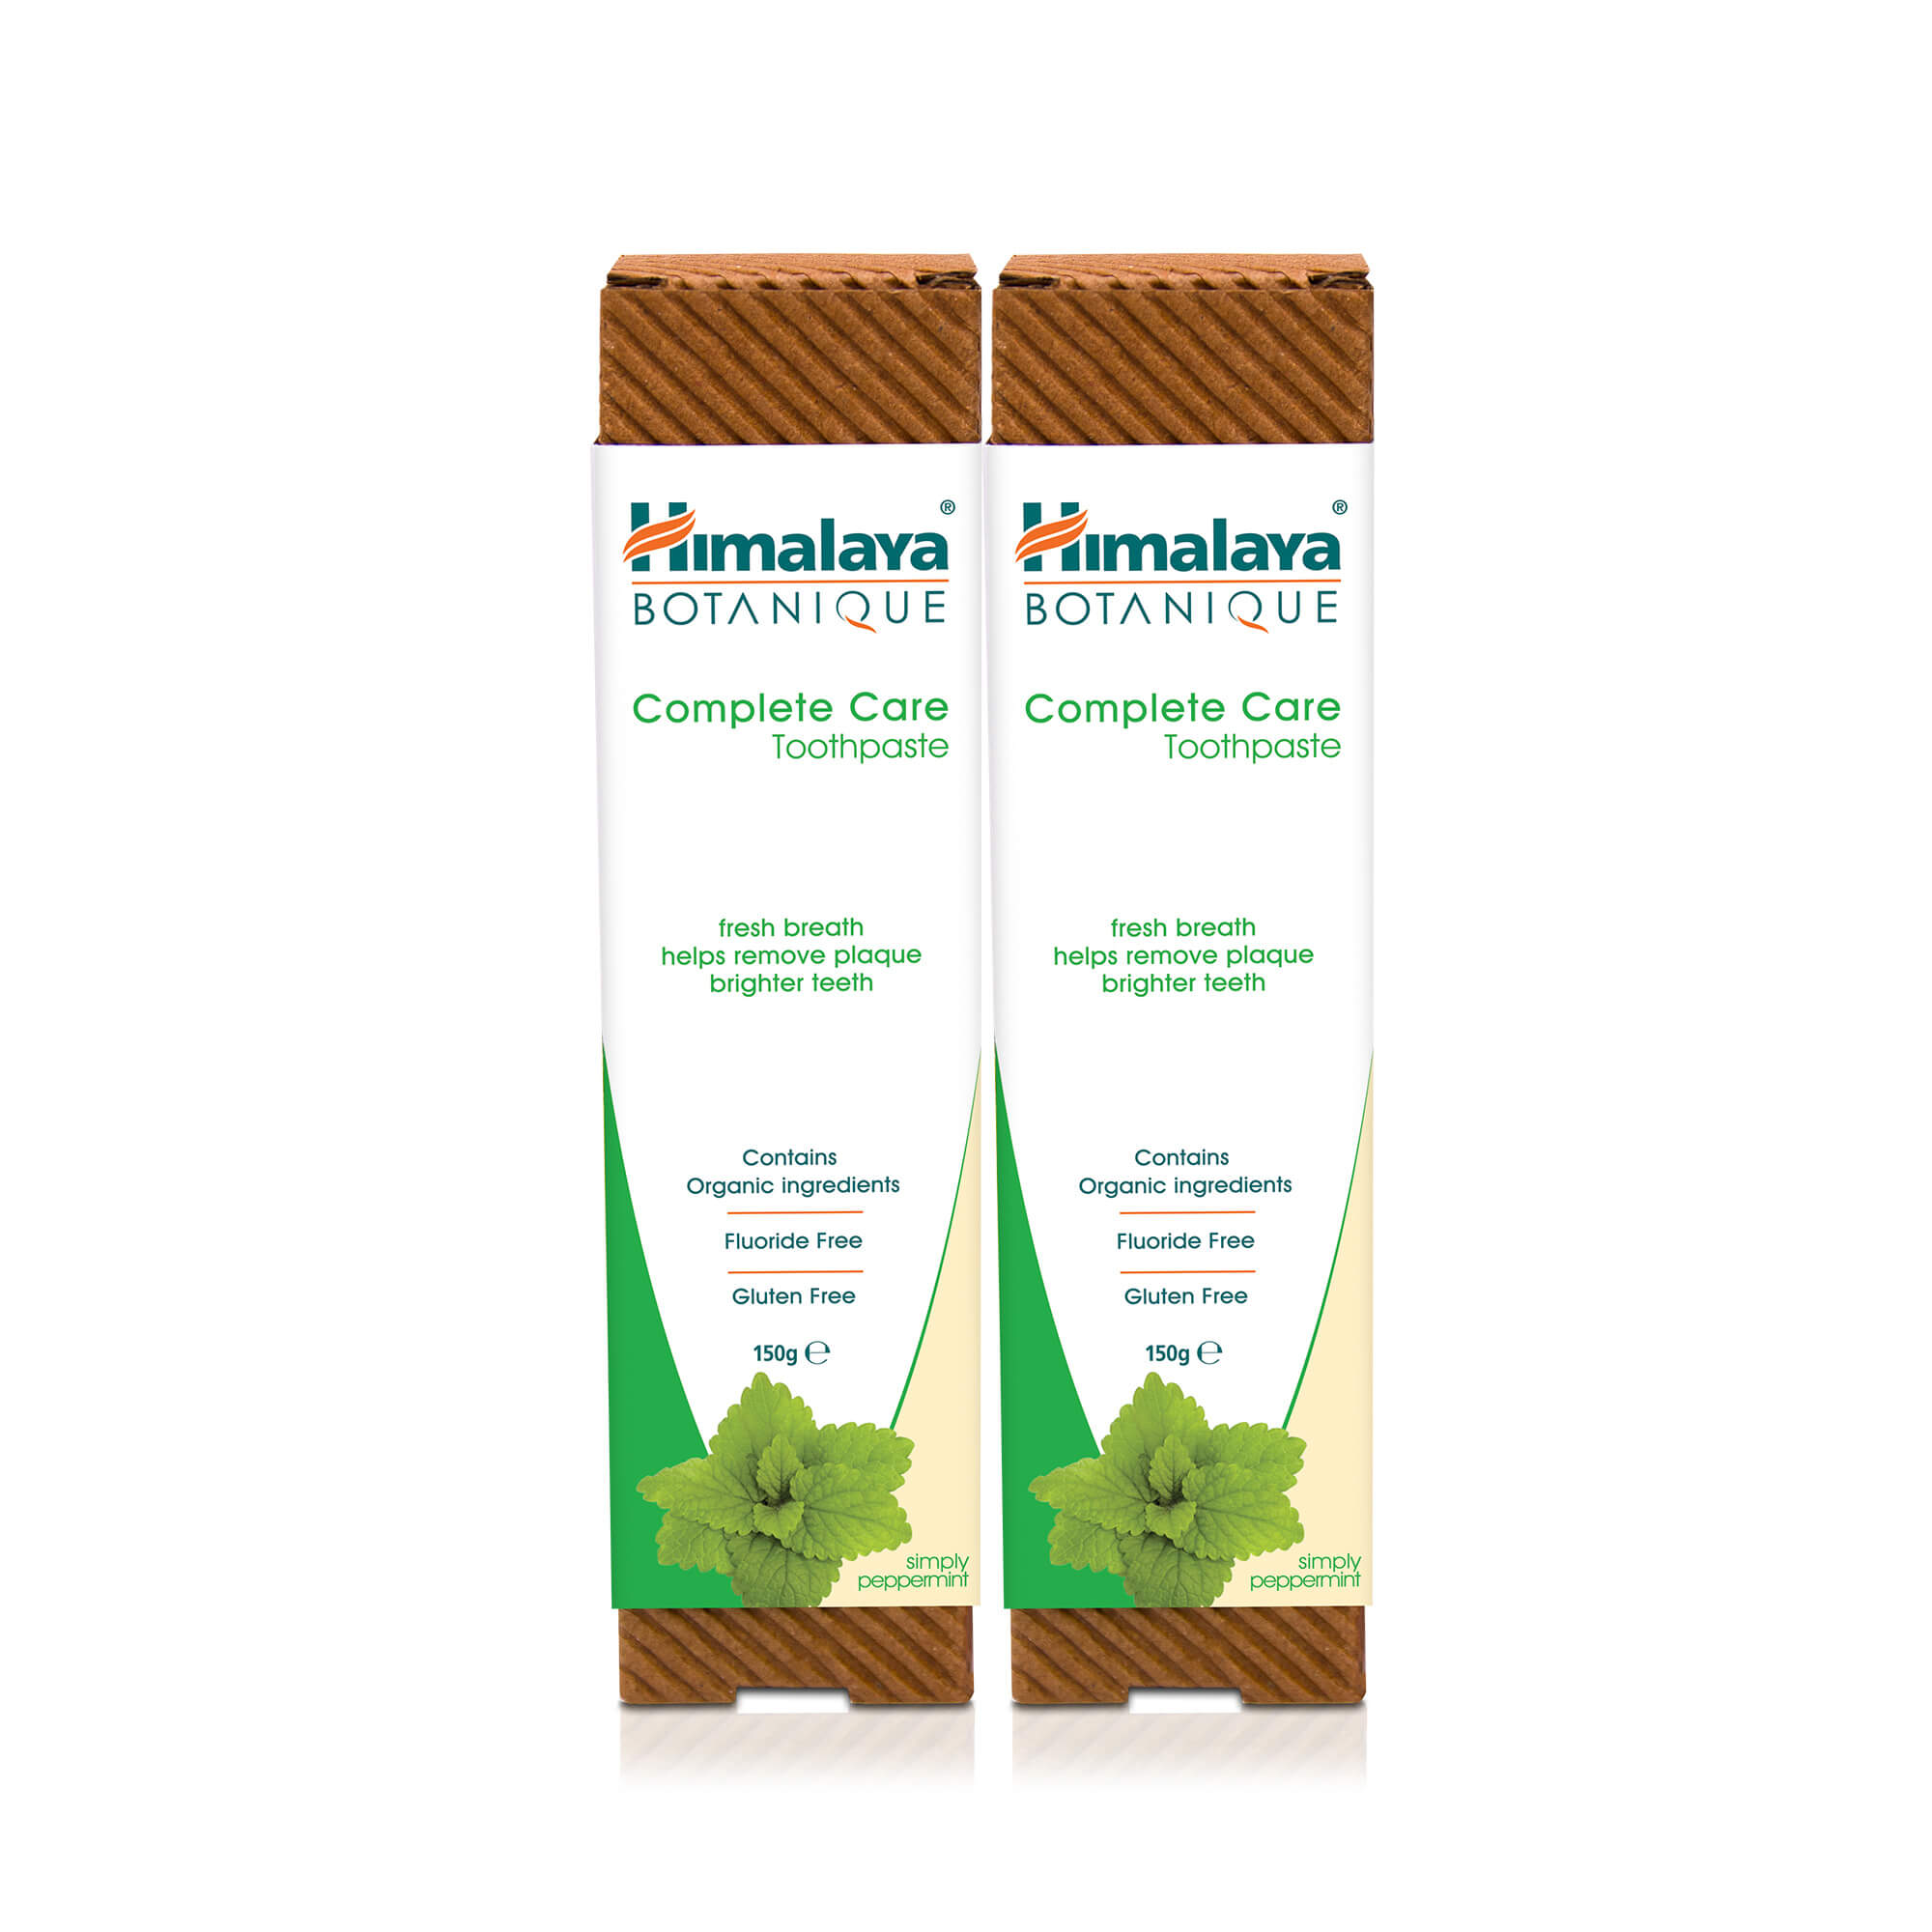 Himalaya BOTANIQUE Complete Care Toothpaste - Simply Peppermint - 150g (Pack of 2)